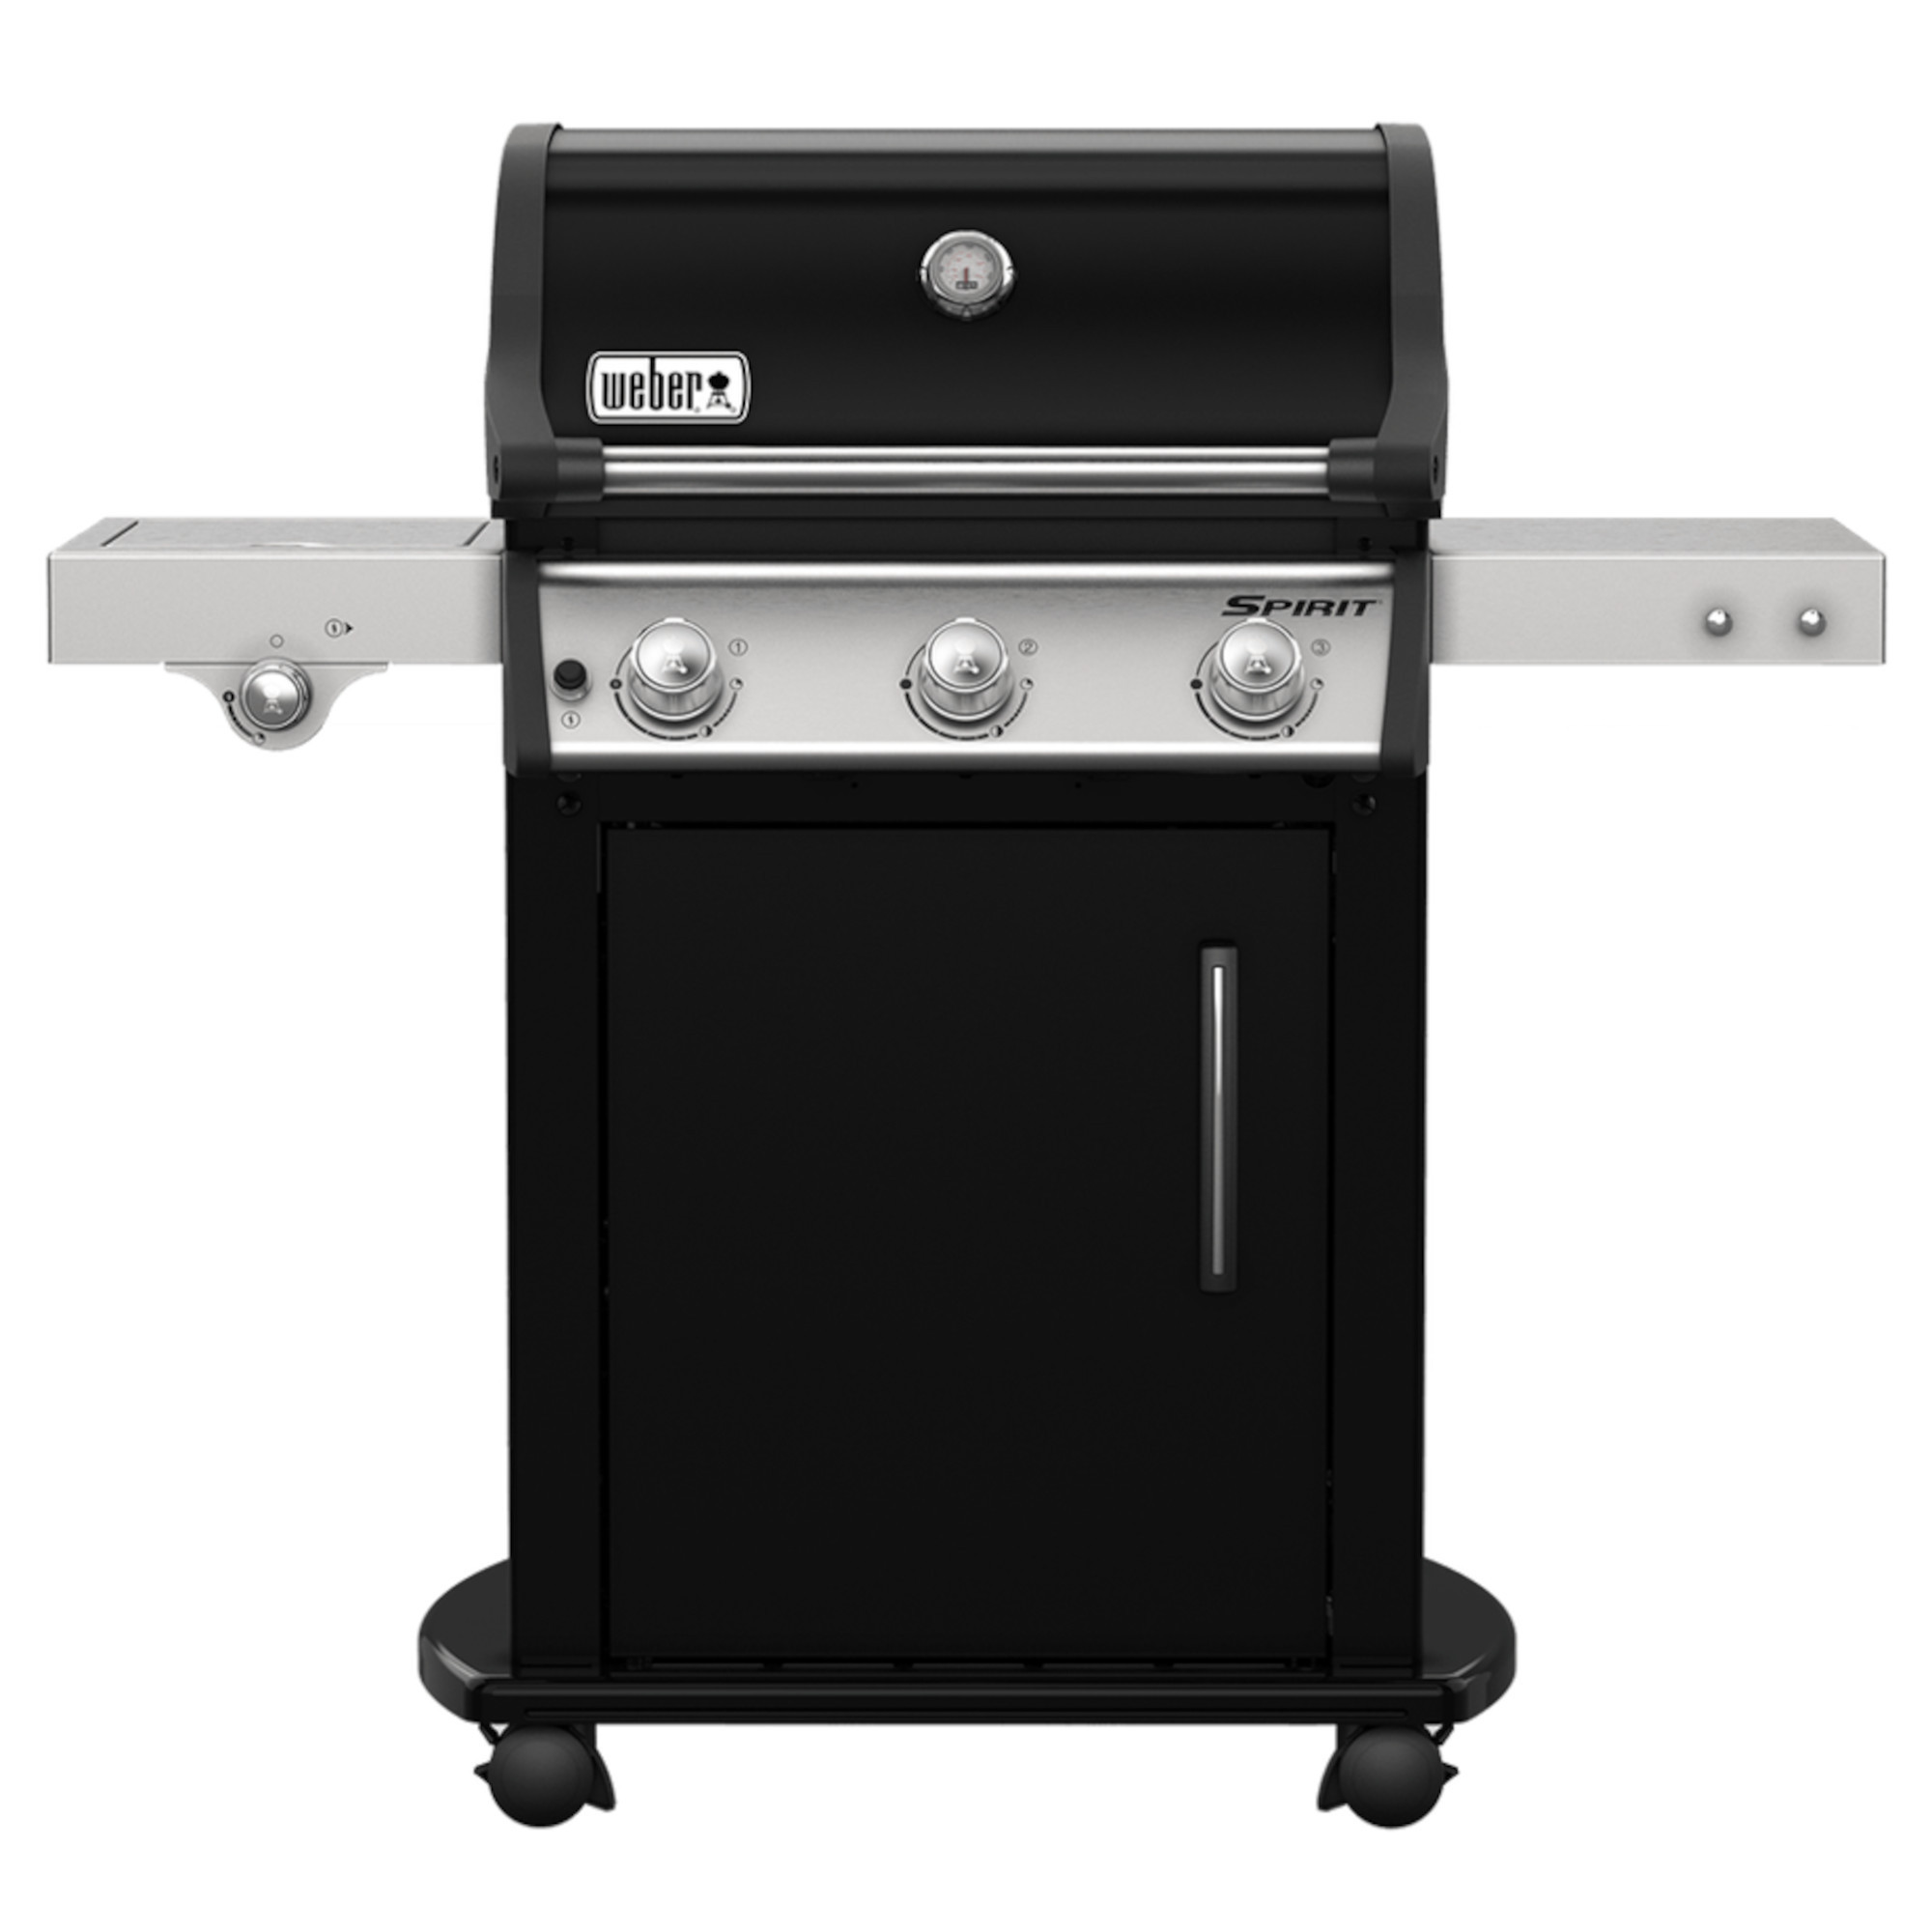 WEBER® Q 3000 GAS BARBECUE, Gas Barbecue, Cooking system